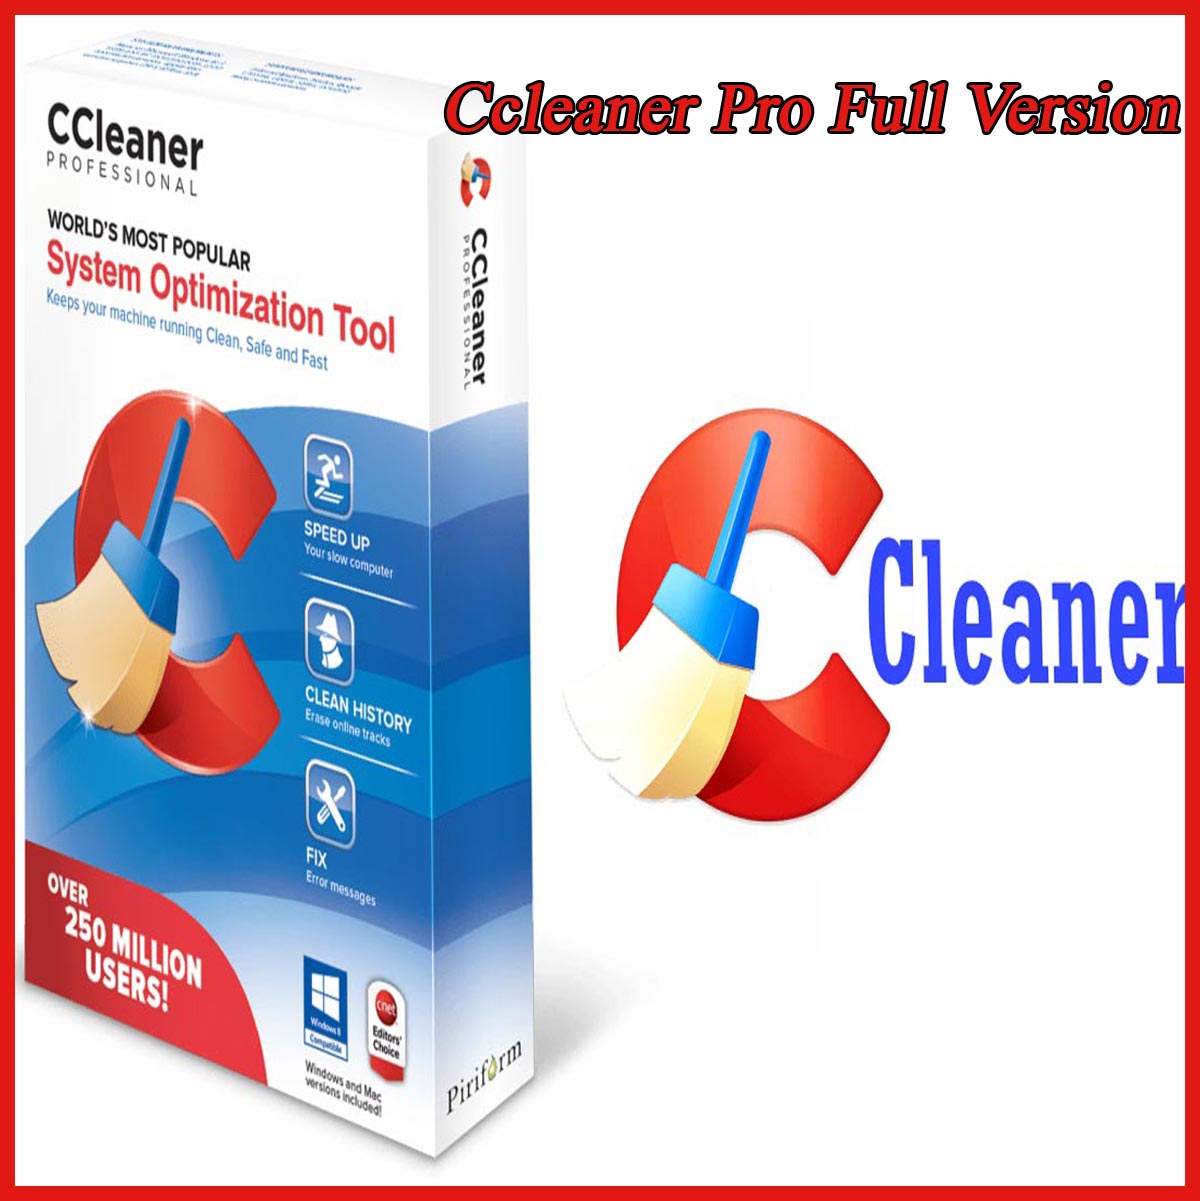 ccleaner pro version history